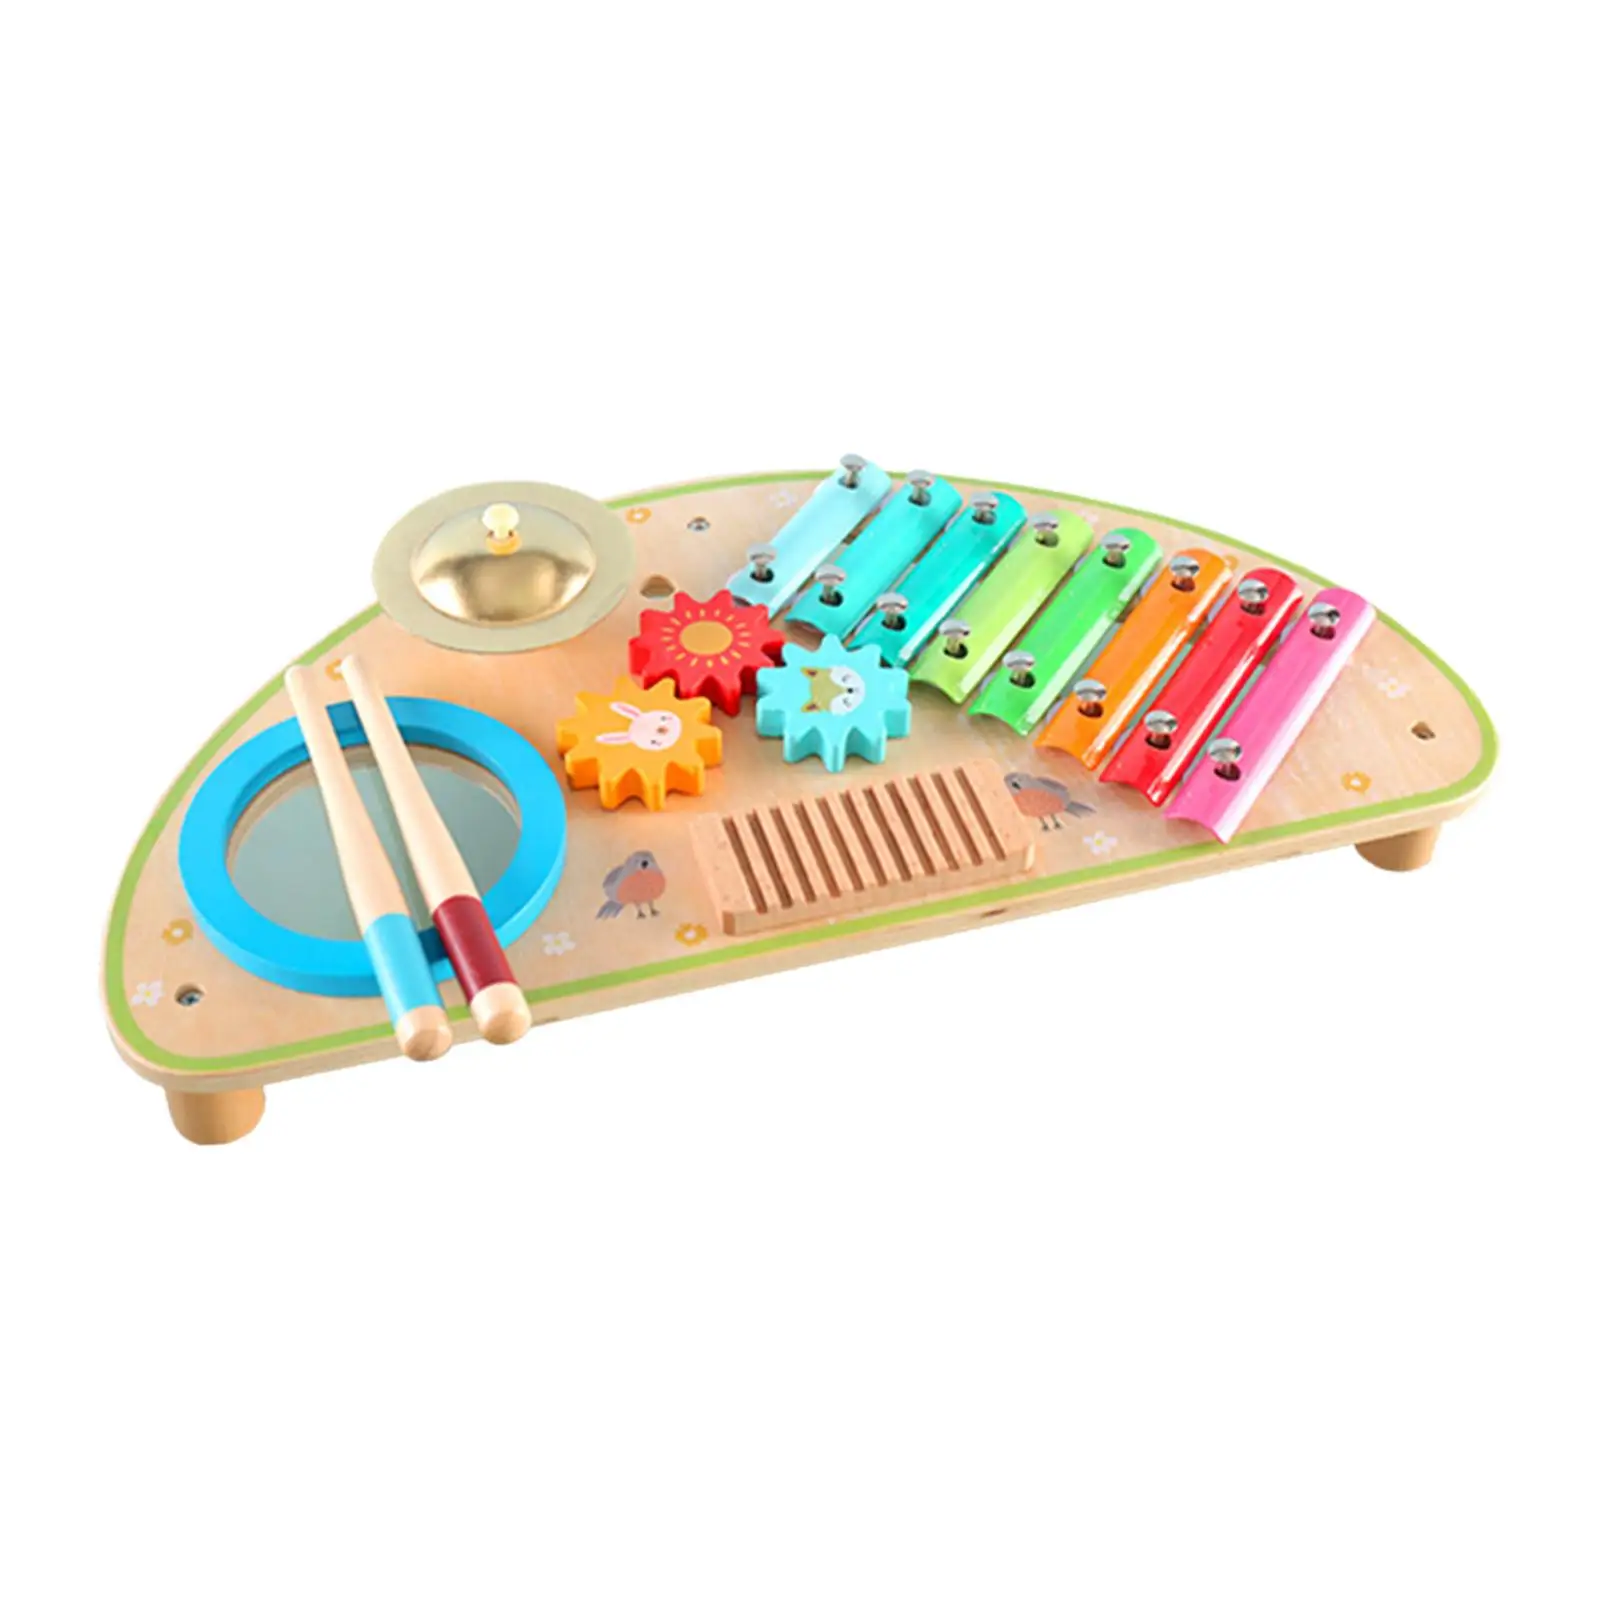 

Wooden Xylophone Toddlers Drum Set Preschool Hand Eye Coordination Montessori Toy for Boy Girl Ages 3 4 5 6 Years Old